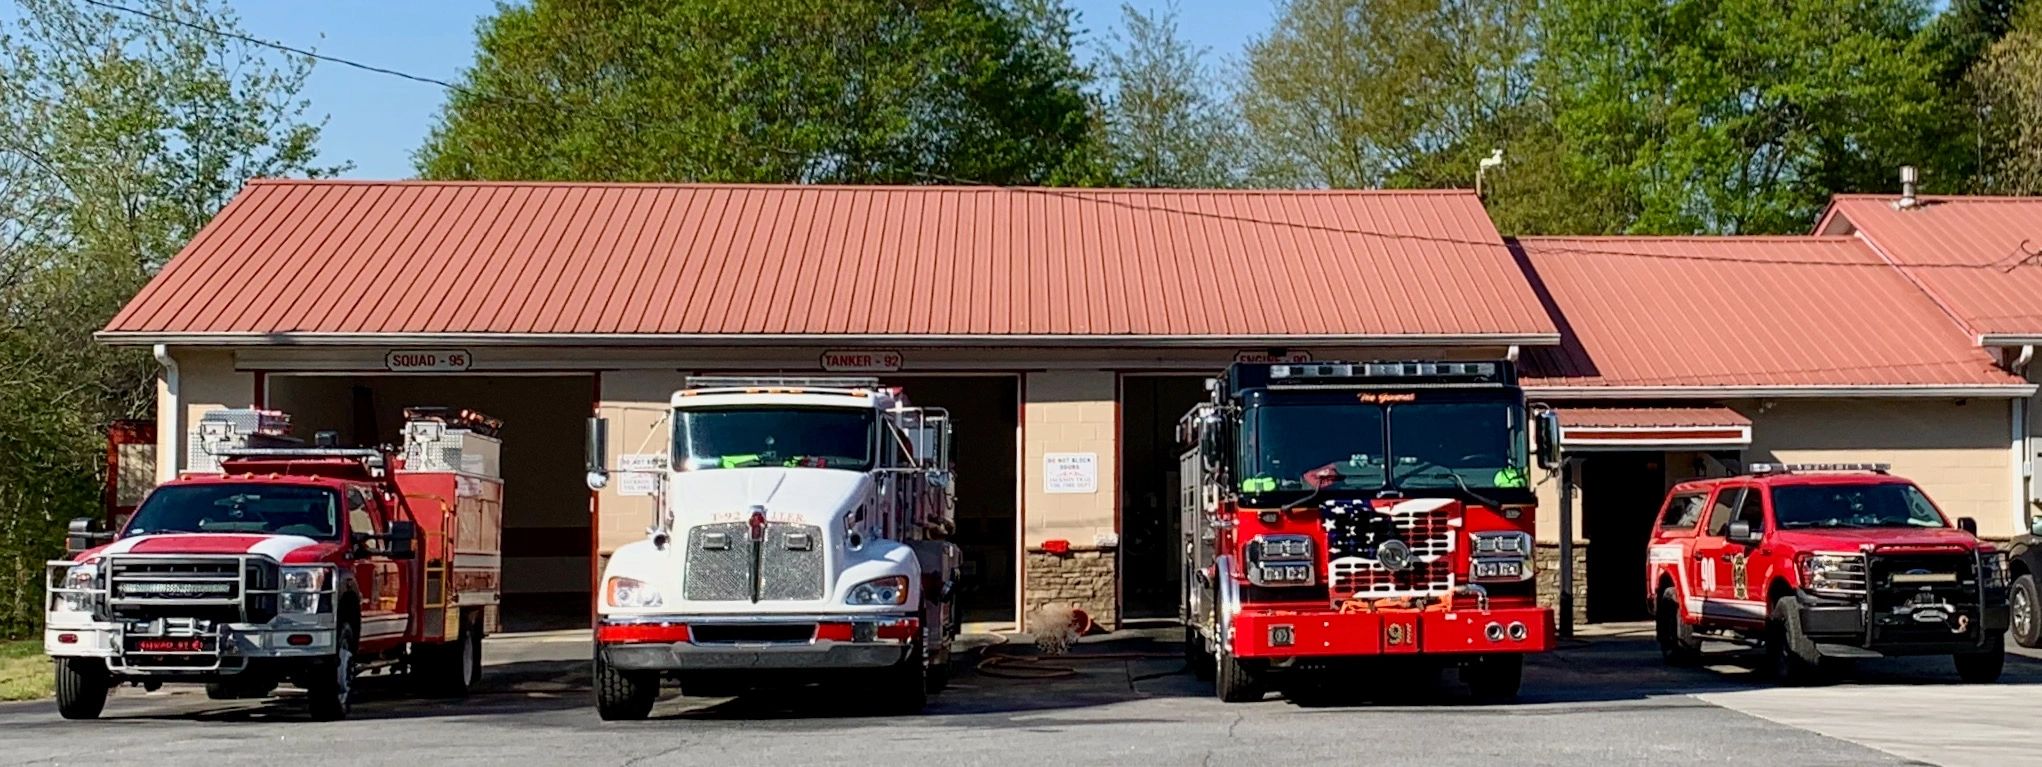 Great Trail Fire District